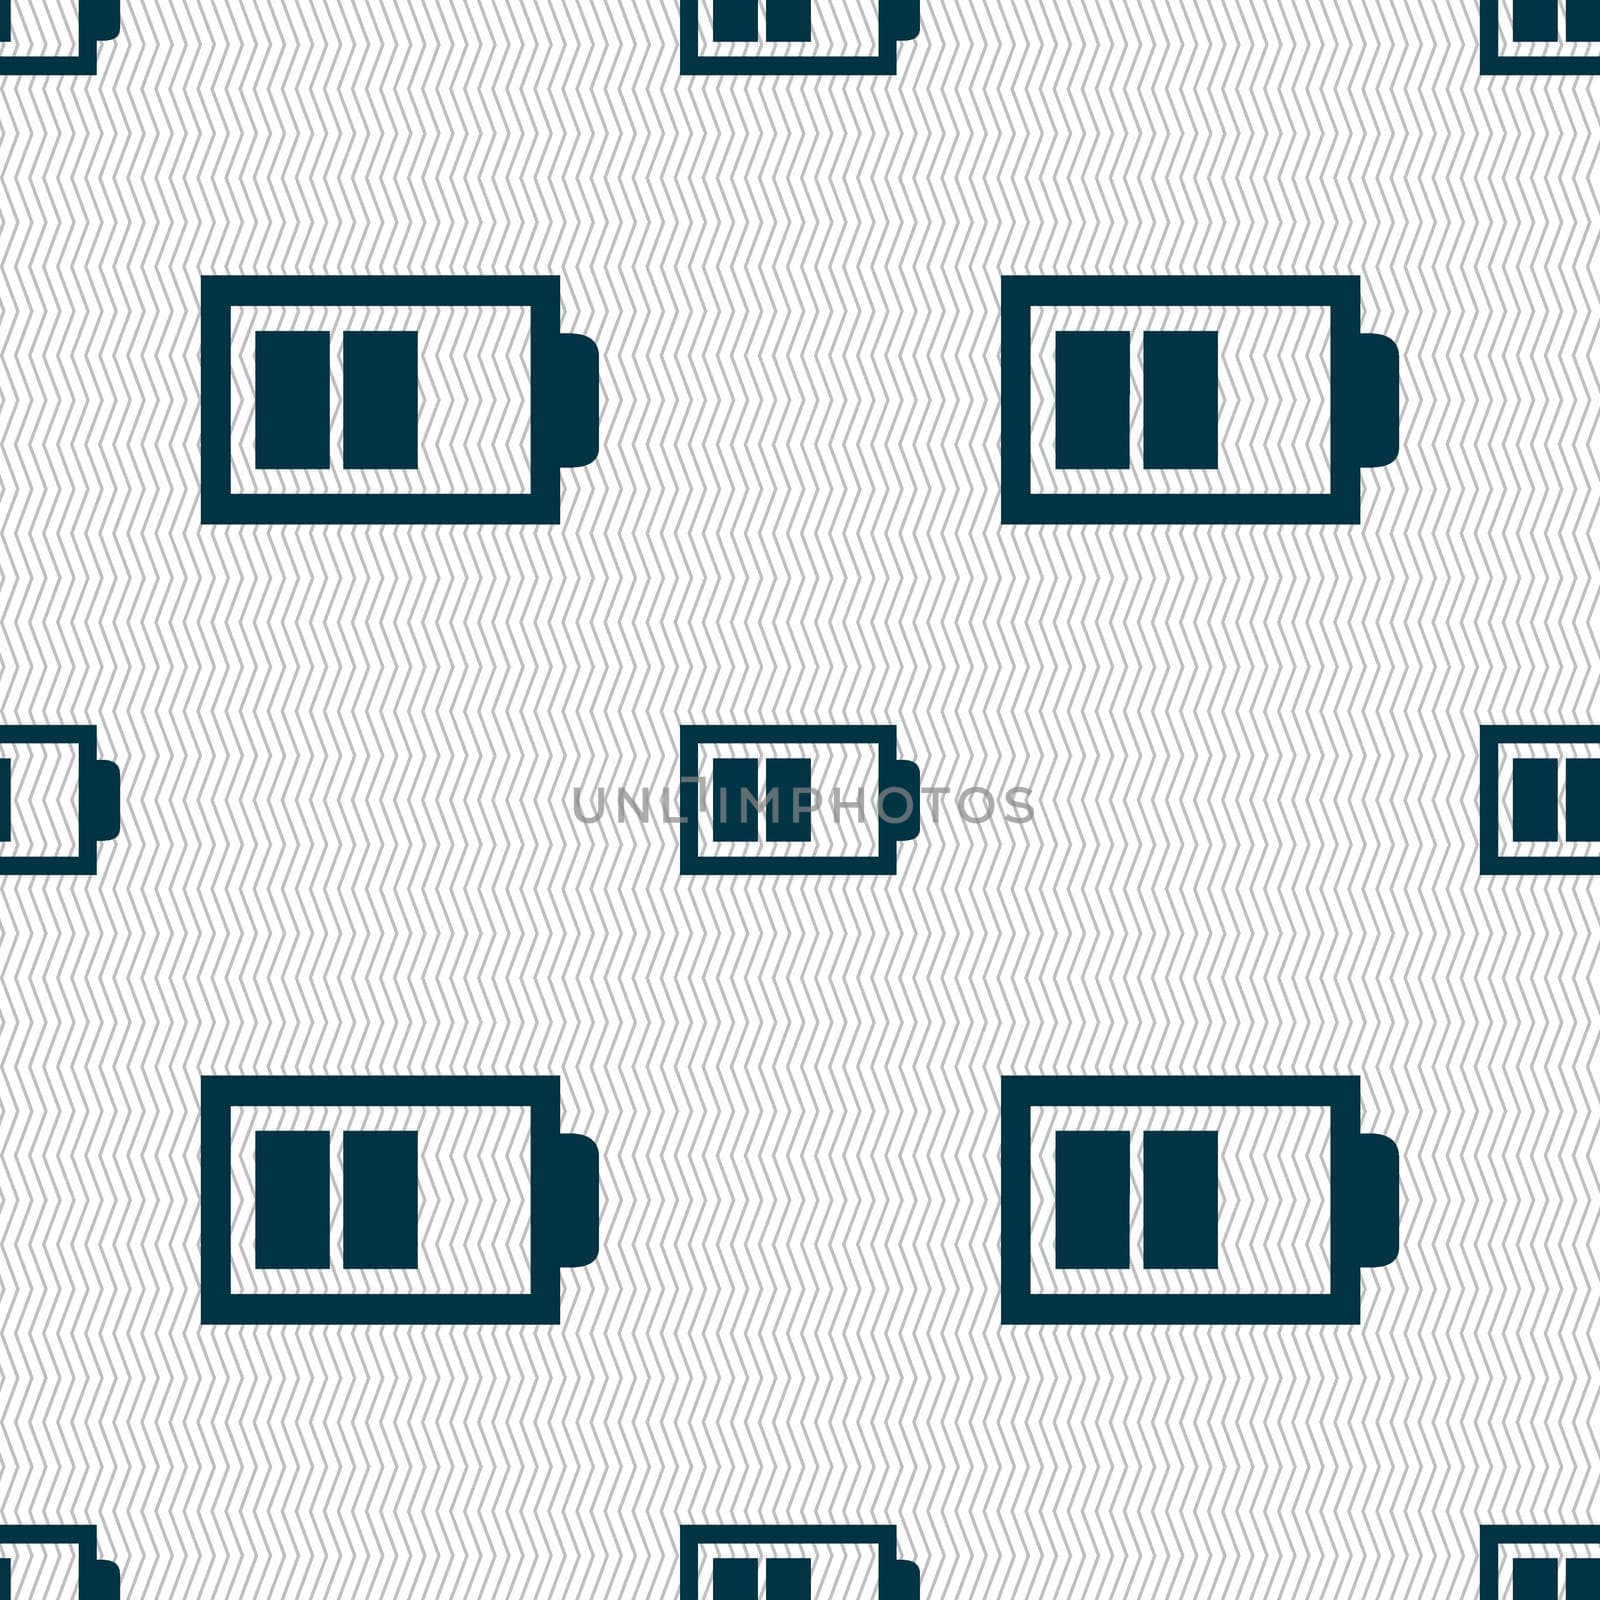 Battery half level sign icon. Low electricity symbol. Seamless abstract background with geometric shapes. illustration